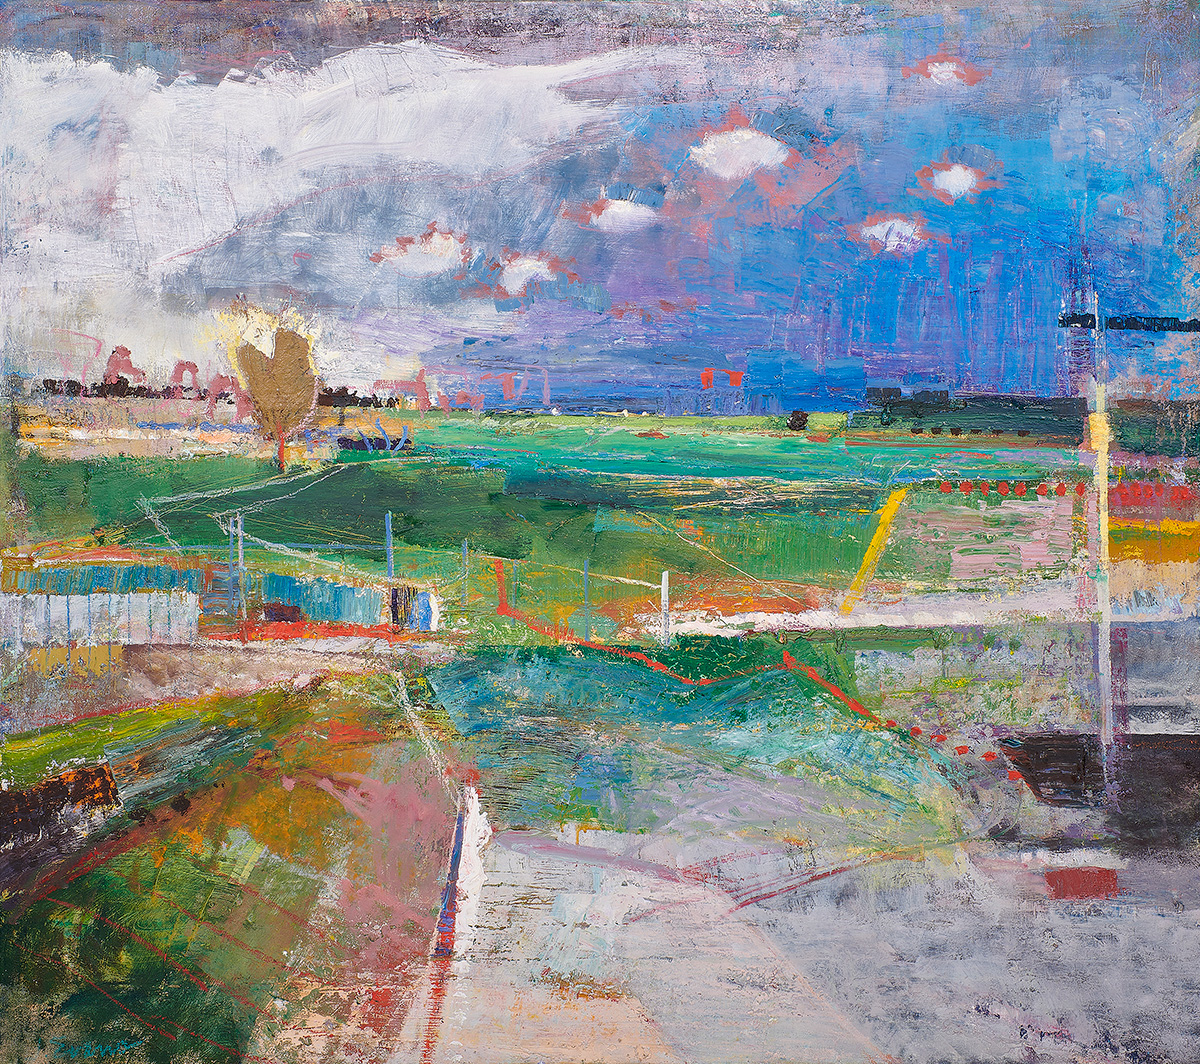 John Evans (American, b. 1945), <em>Beach Parking</em>, 1997, oil on canvas, 48″ x 52.25″. Provenance: Acquired by descent from the Estate of Allan Stone.